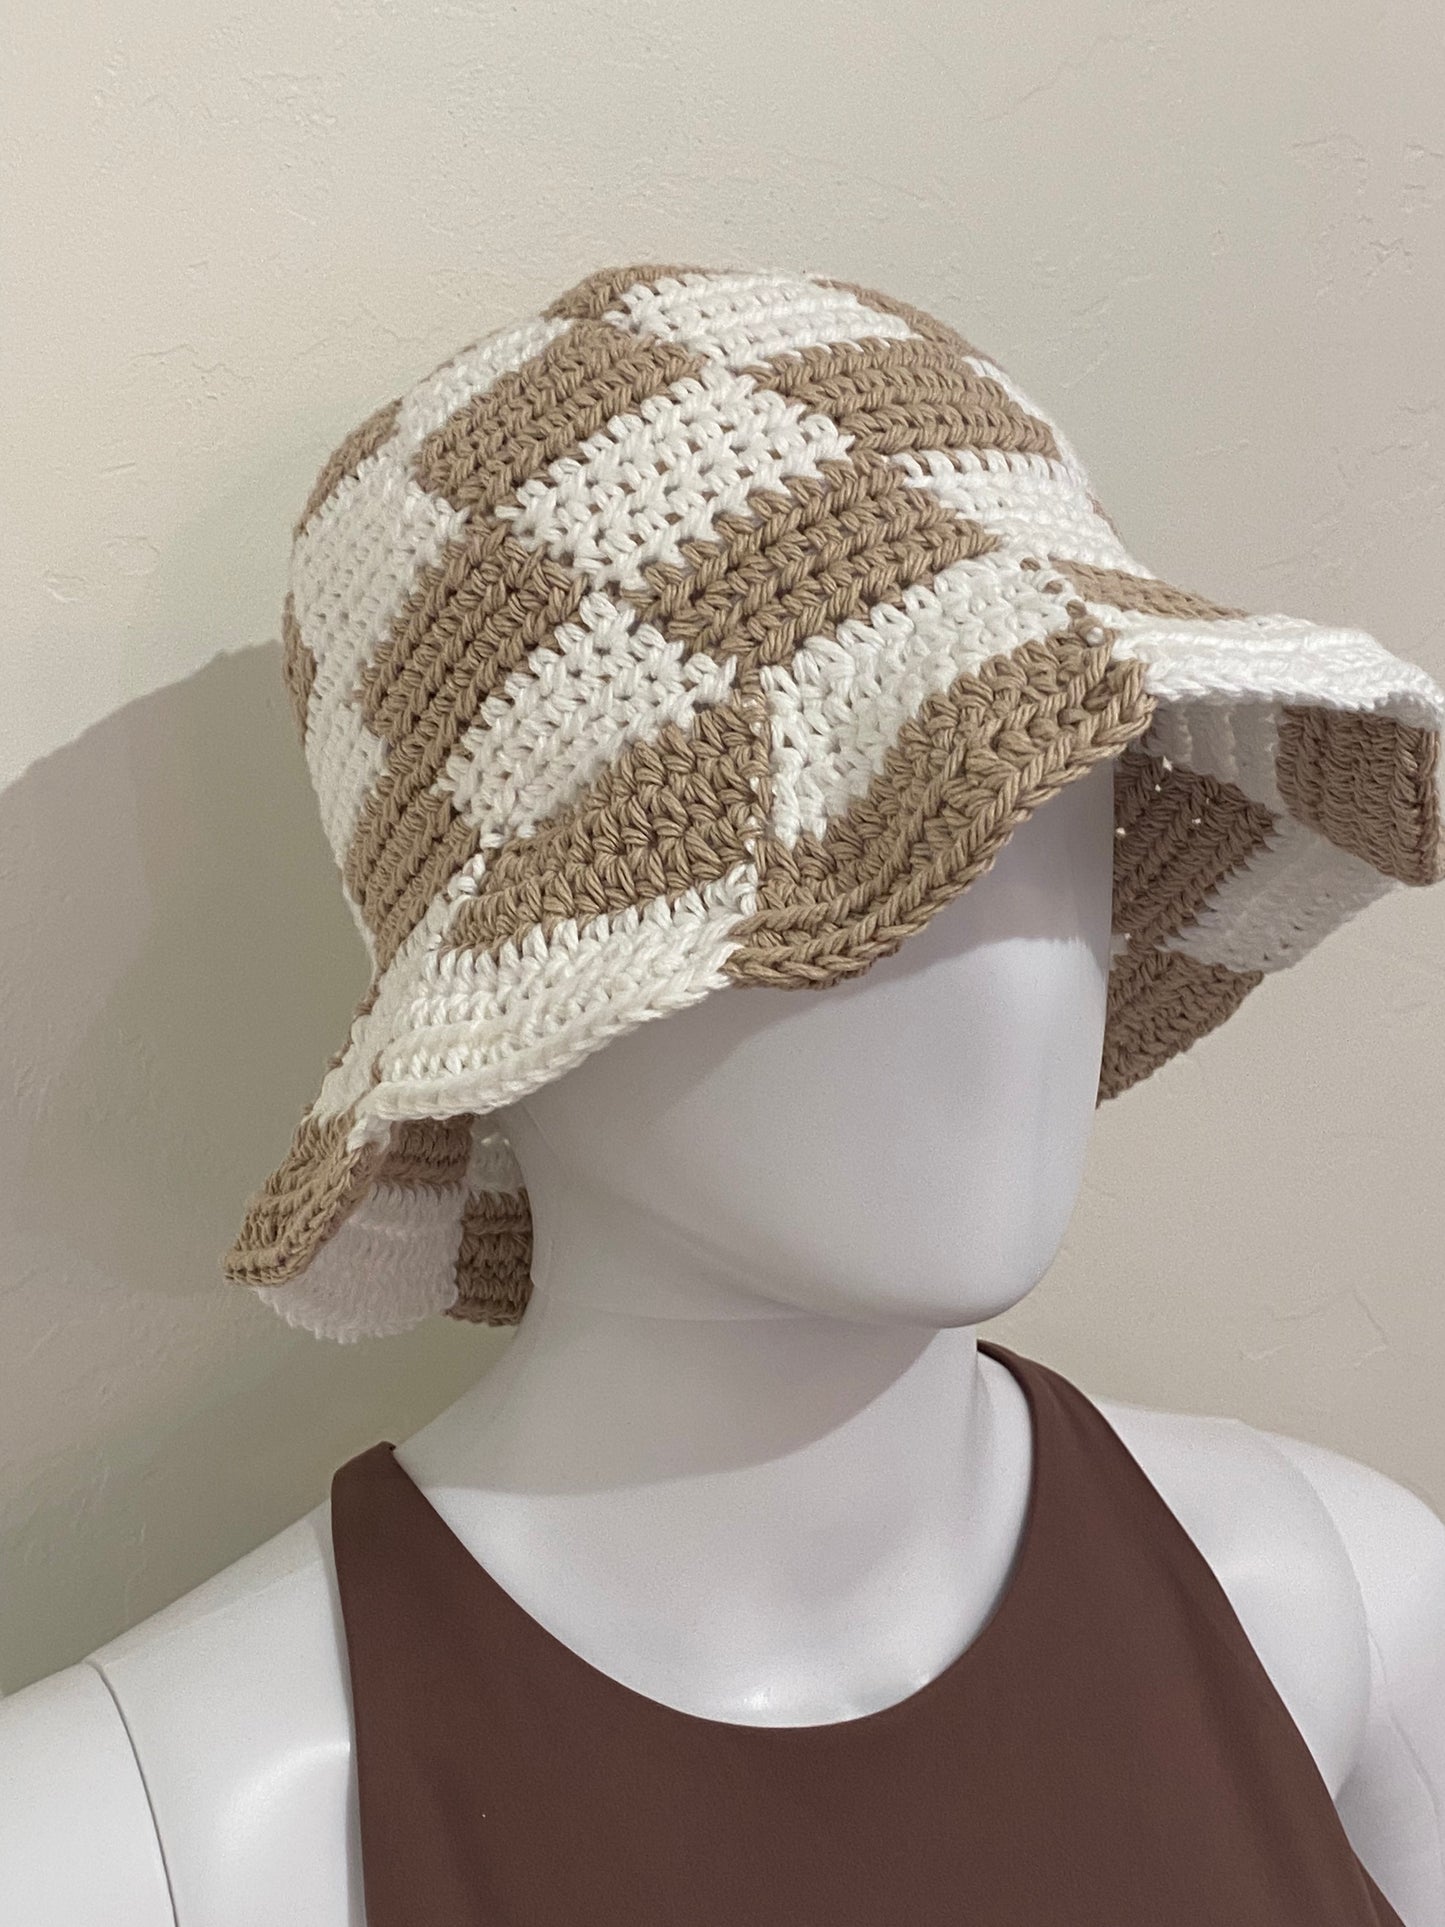 Crochet Hat by Clever Stitches - Tan & White